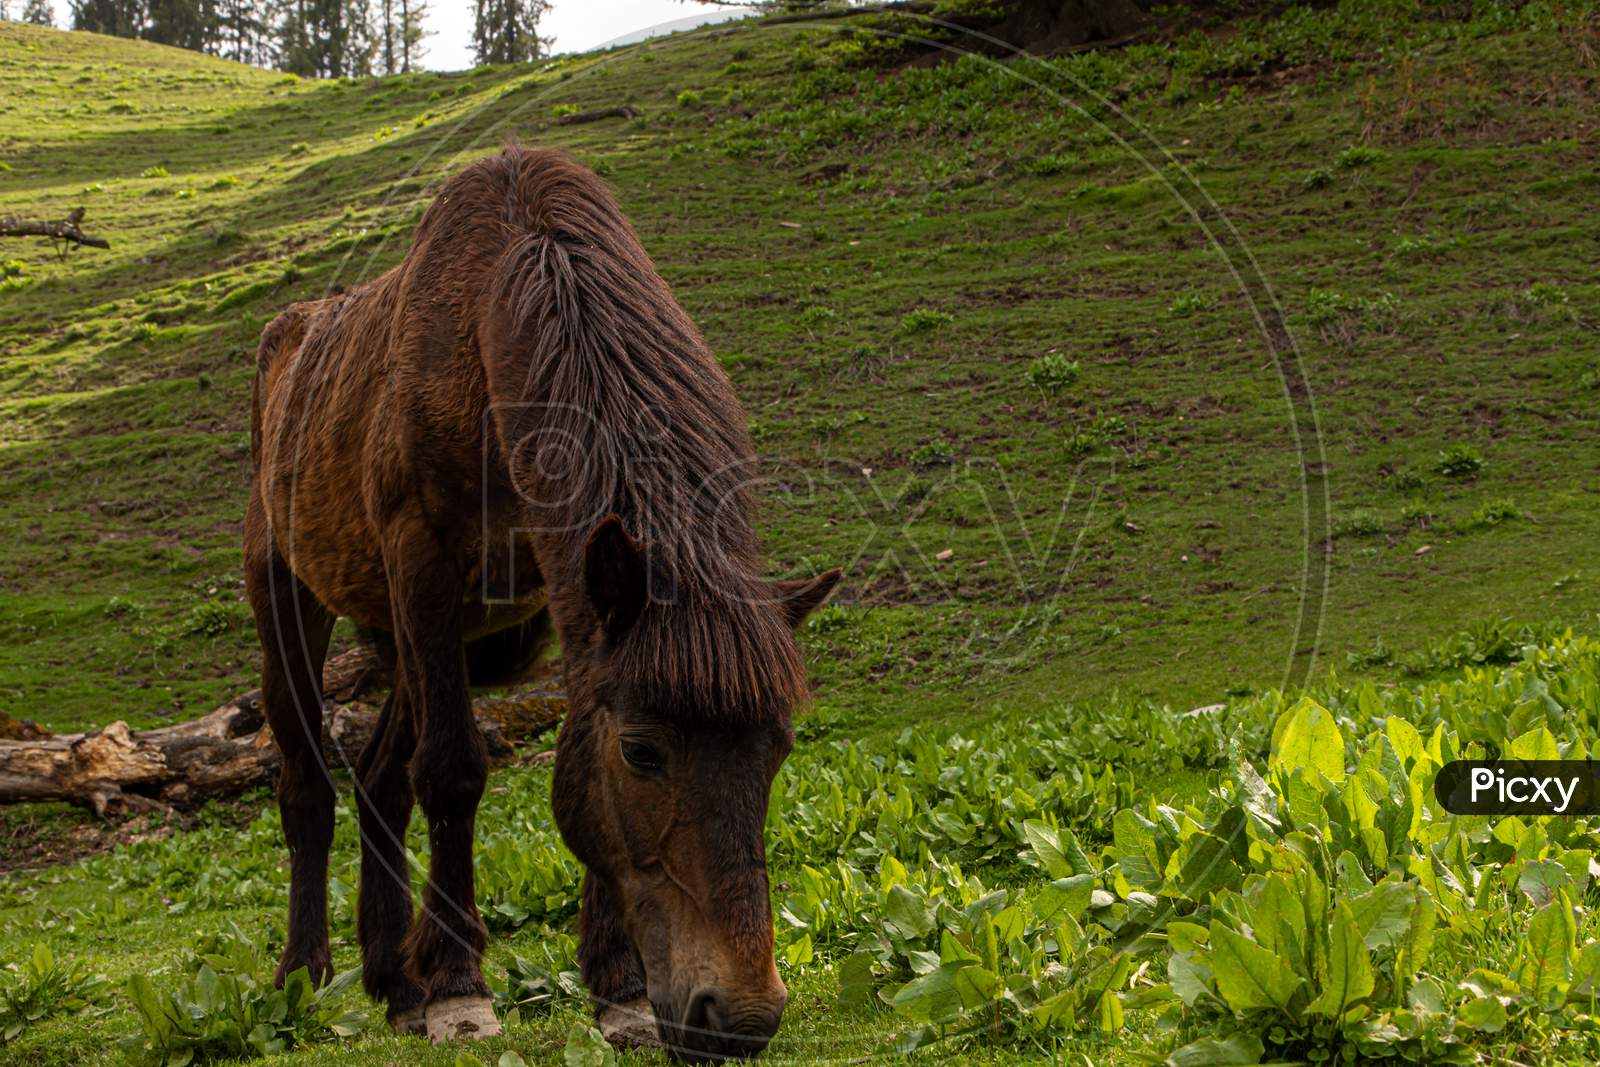 Horses grazing in Himalayas mountains